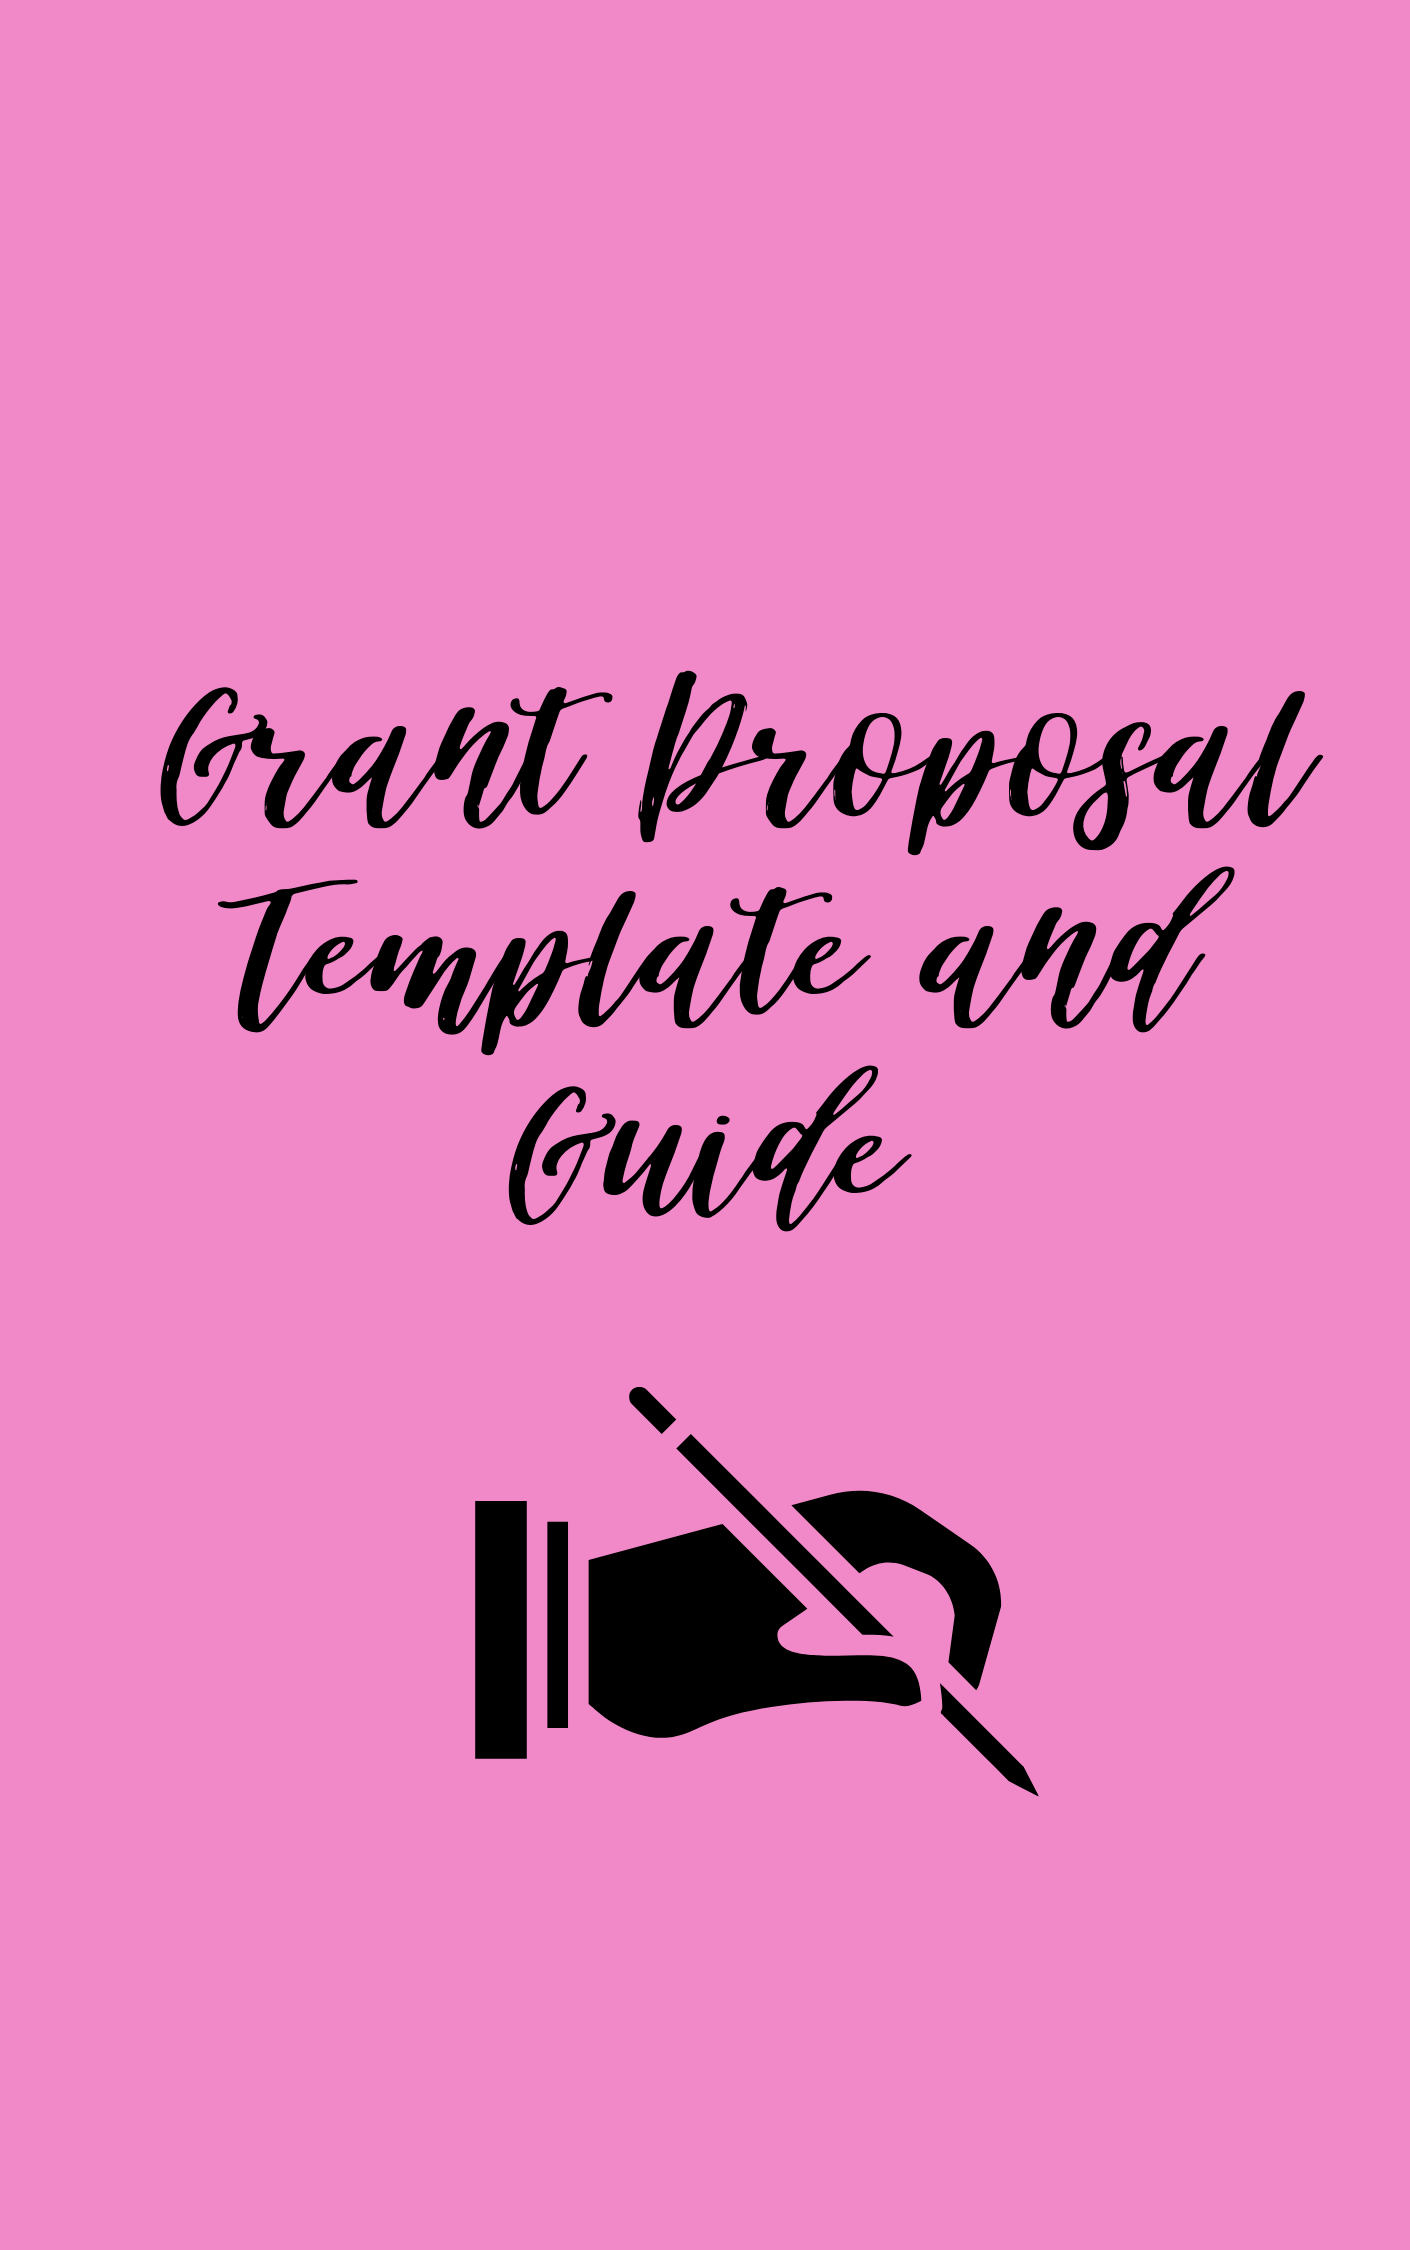 Grant Proposal Template - Ebony's Beauty Hair and Skin Care LLC